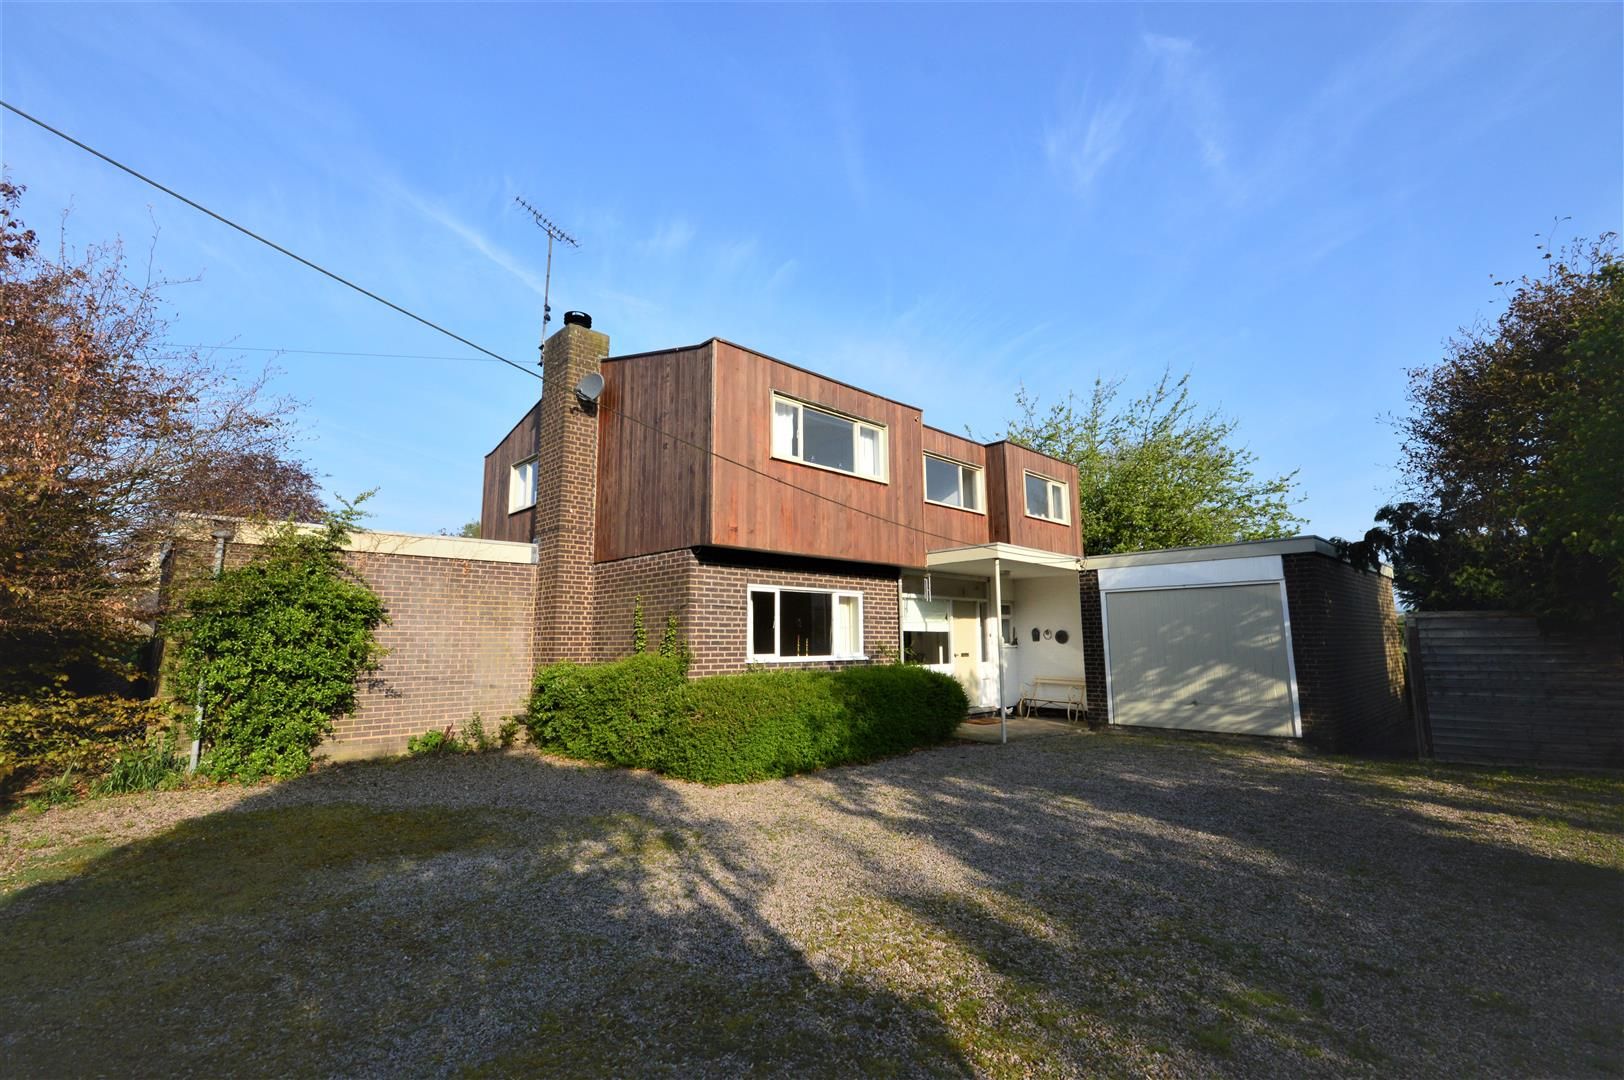 3 bed detached for sale in Eardisland - Property Image 1